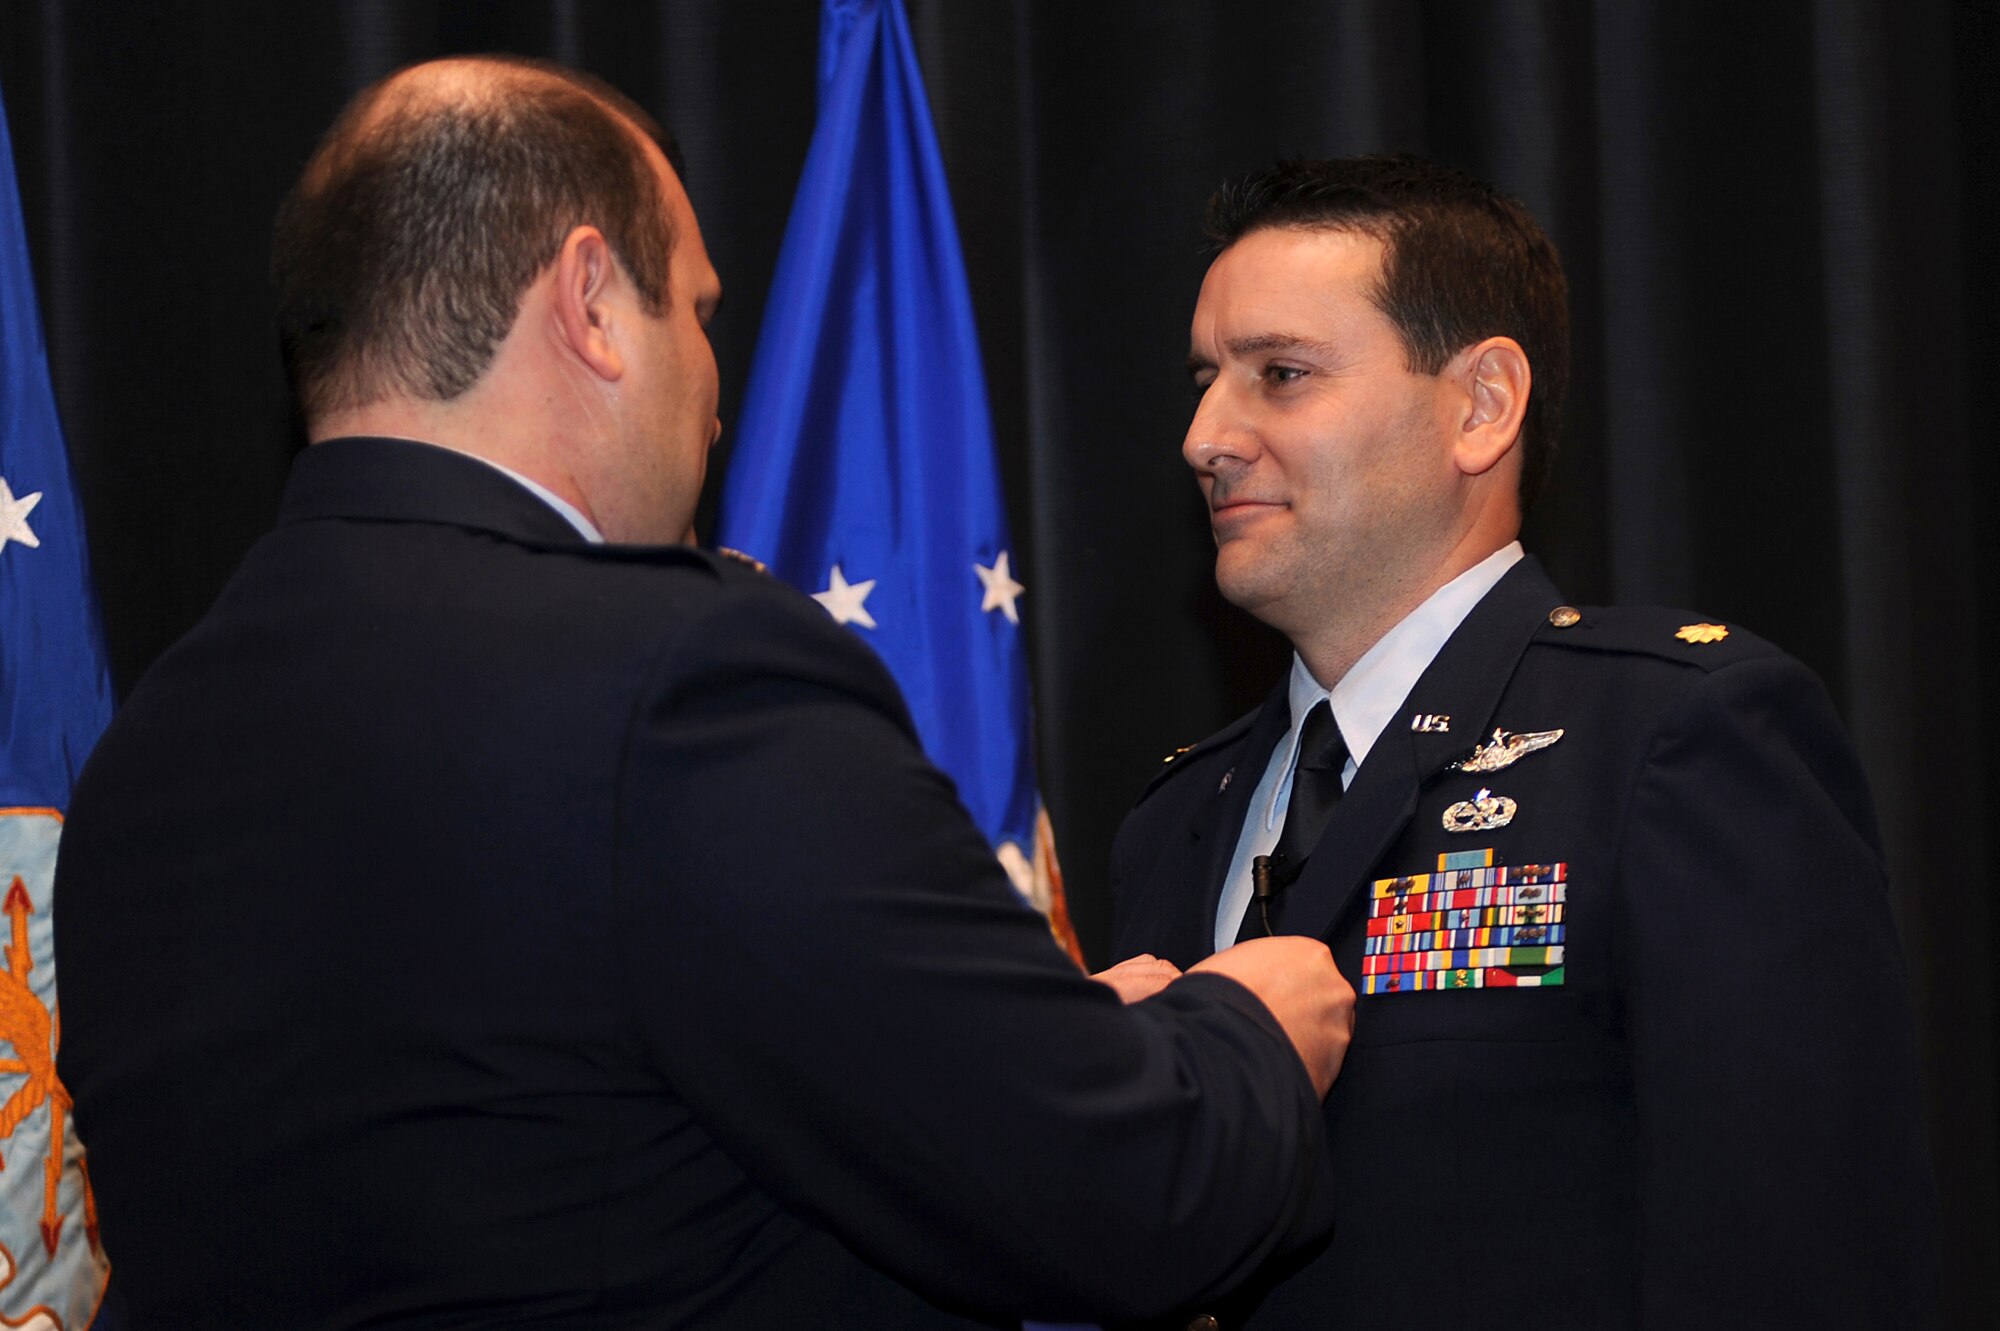 Maj. Craig Juneau from Scott Air Force Base, Ill., pins on a Meritorious Service Medal on Maj. John M. Yerger during his retirement ceremony in the U.S. Air Force Expeditionary Center on Fort Dix, N.J., Jan. 9, 2009.  Major Yerger was the assistant chief, logistics and resources for the Center's Expeditionary Operations School.  Prior to this position, Major Yerger served for four years in the Air Mobility Battlelab as a project manager and the chief of finance and program support.  Major Yerger's retirement is effective on March 1.  (U.S. Air Force Photo/Staff Sgt. Nathan Bevier)